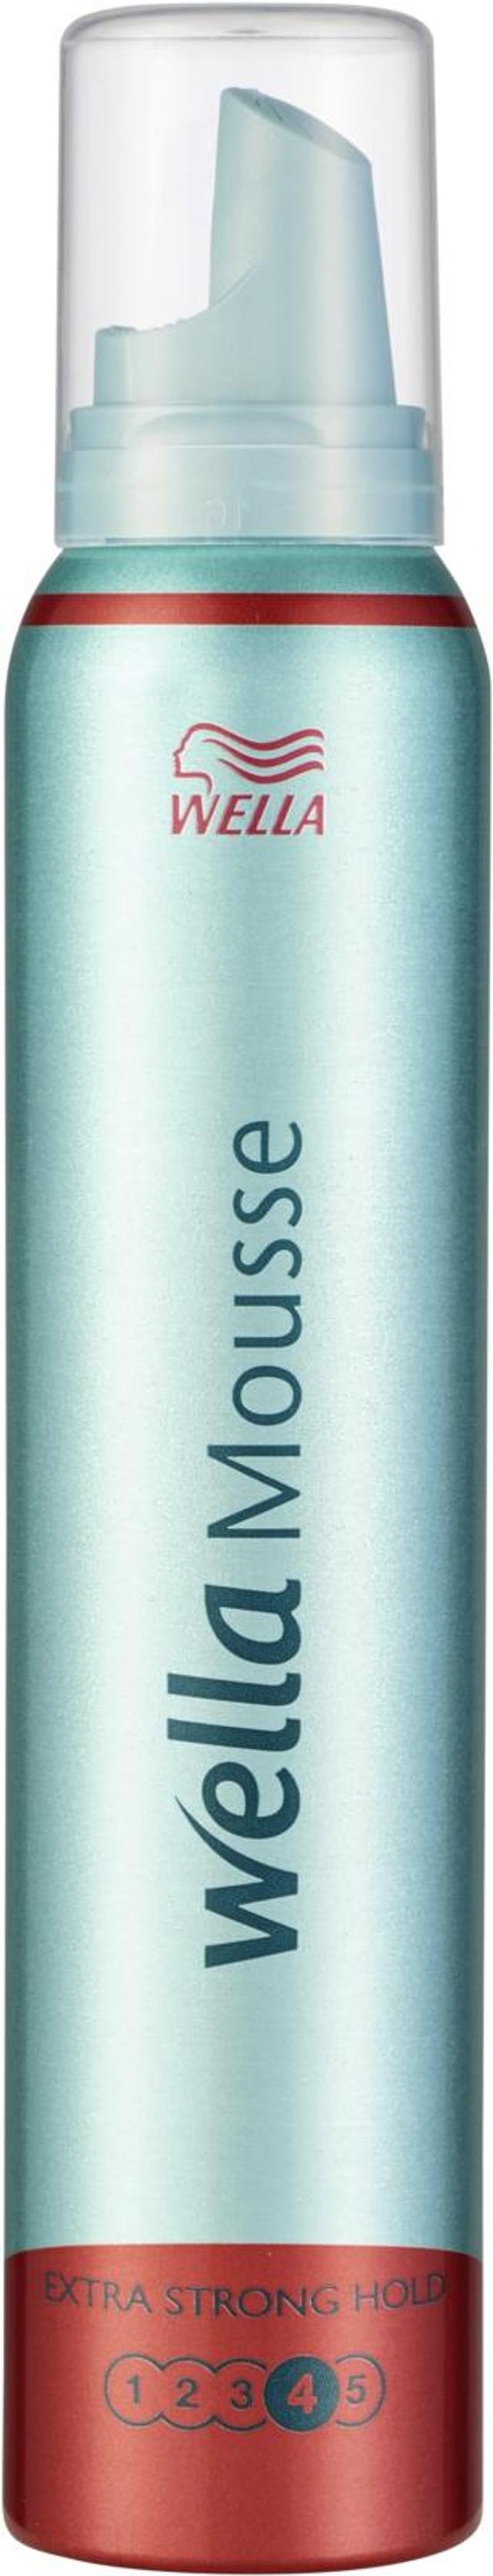 Wella Classic 200ml Extra Strong muotovaahto